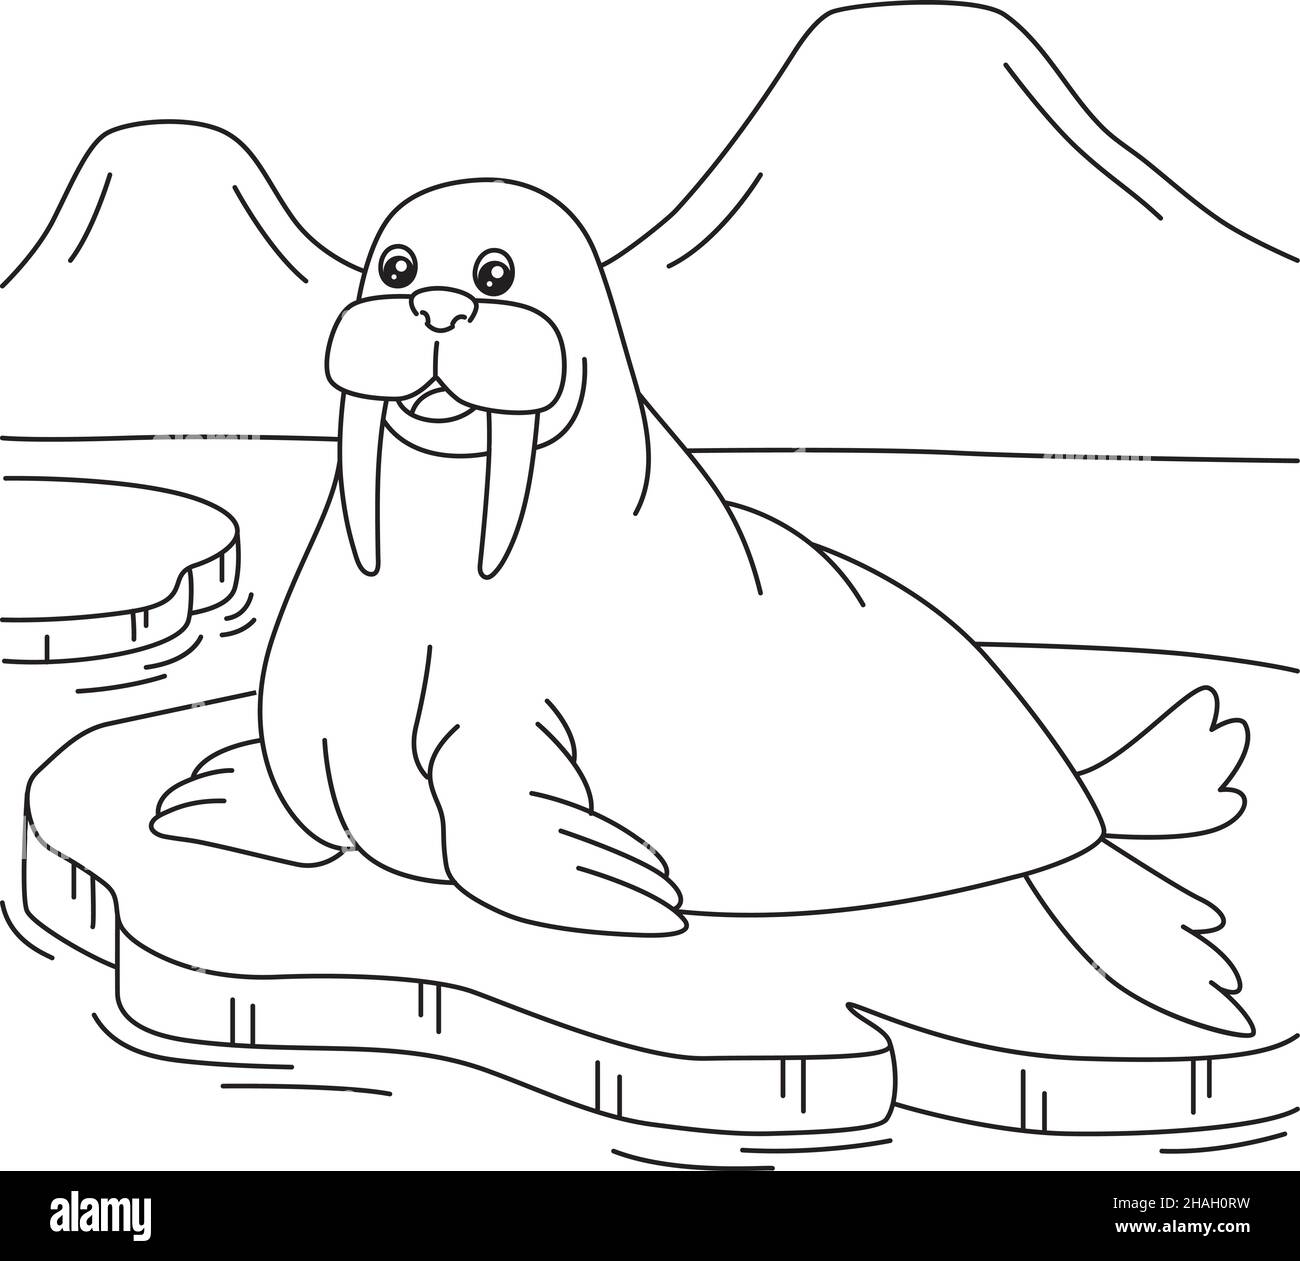 Walrus Coloring Page for Kids Stock Vector